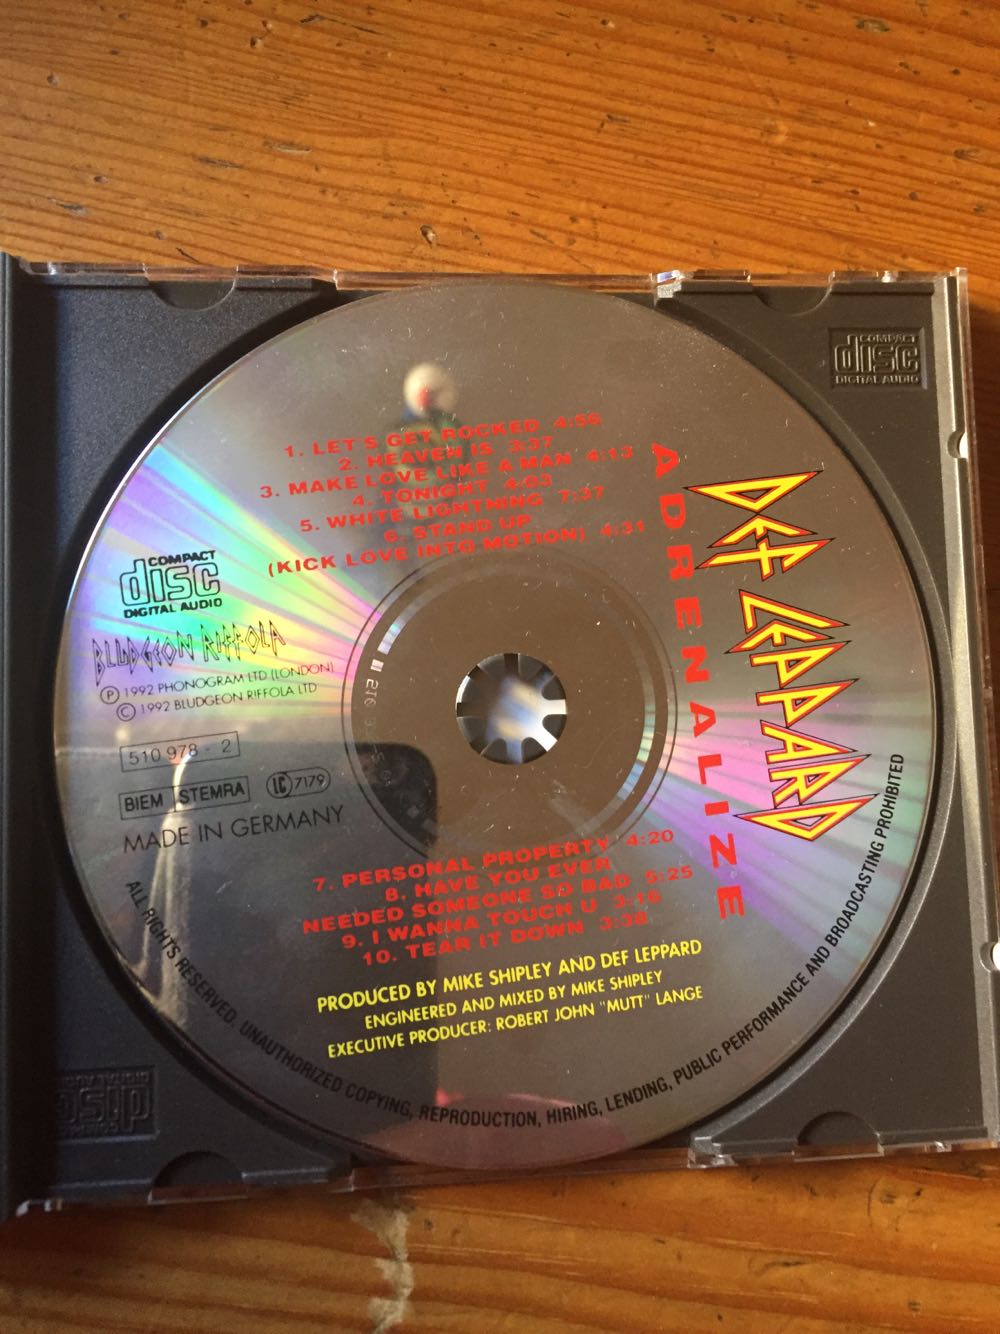 Adrenalize - Def Leppard (CD - 46) music collectible [Barcode 731451097829] - Main Image 3